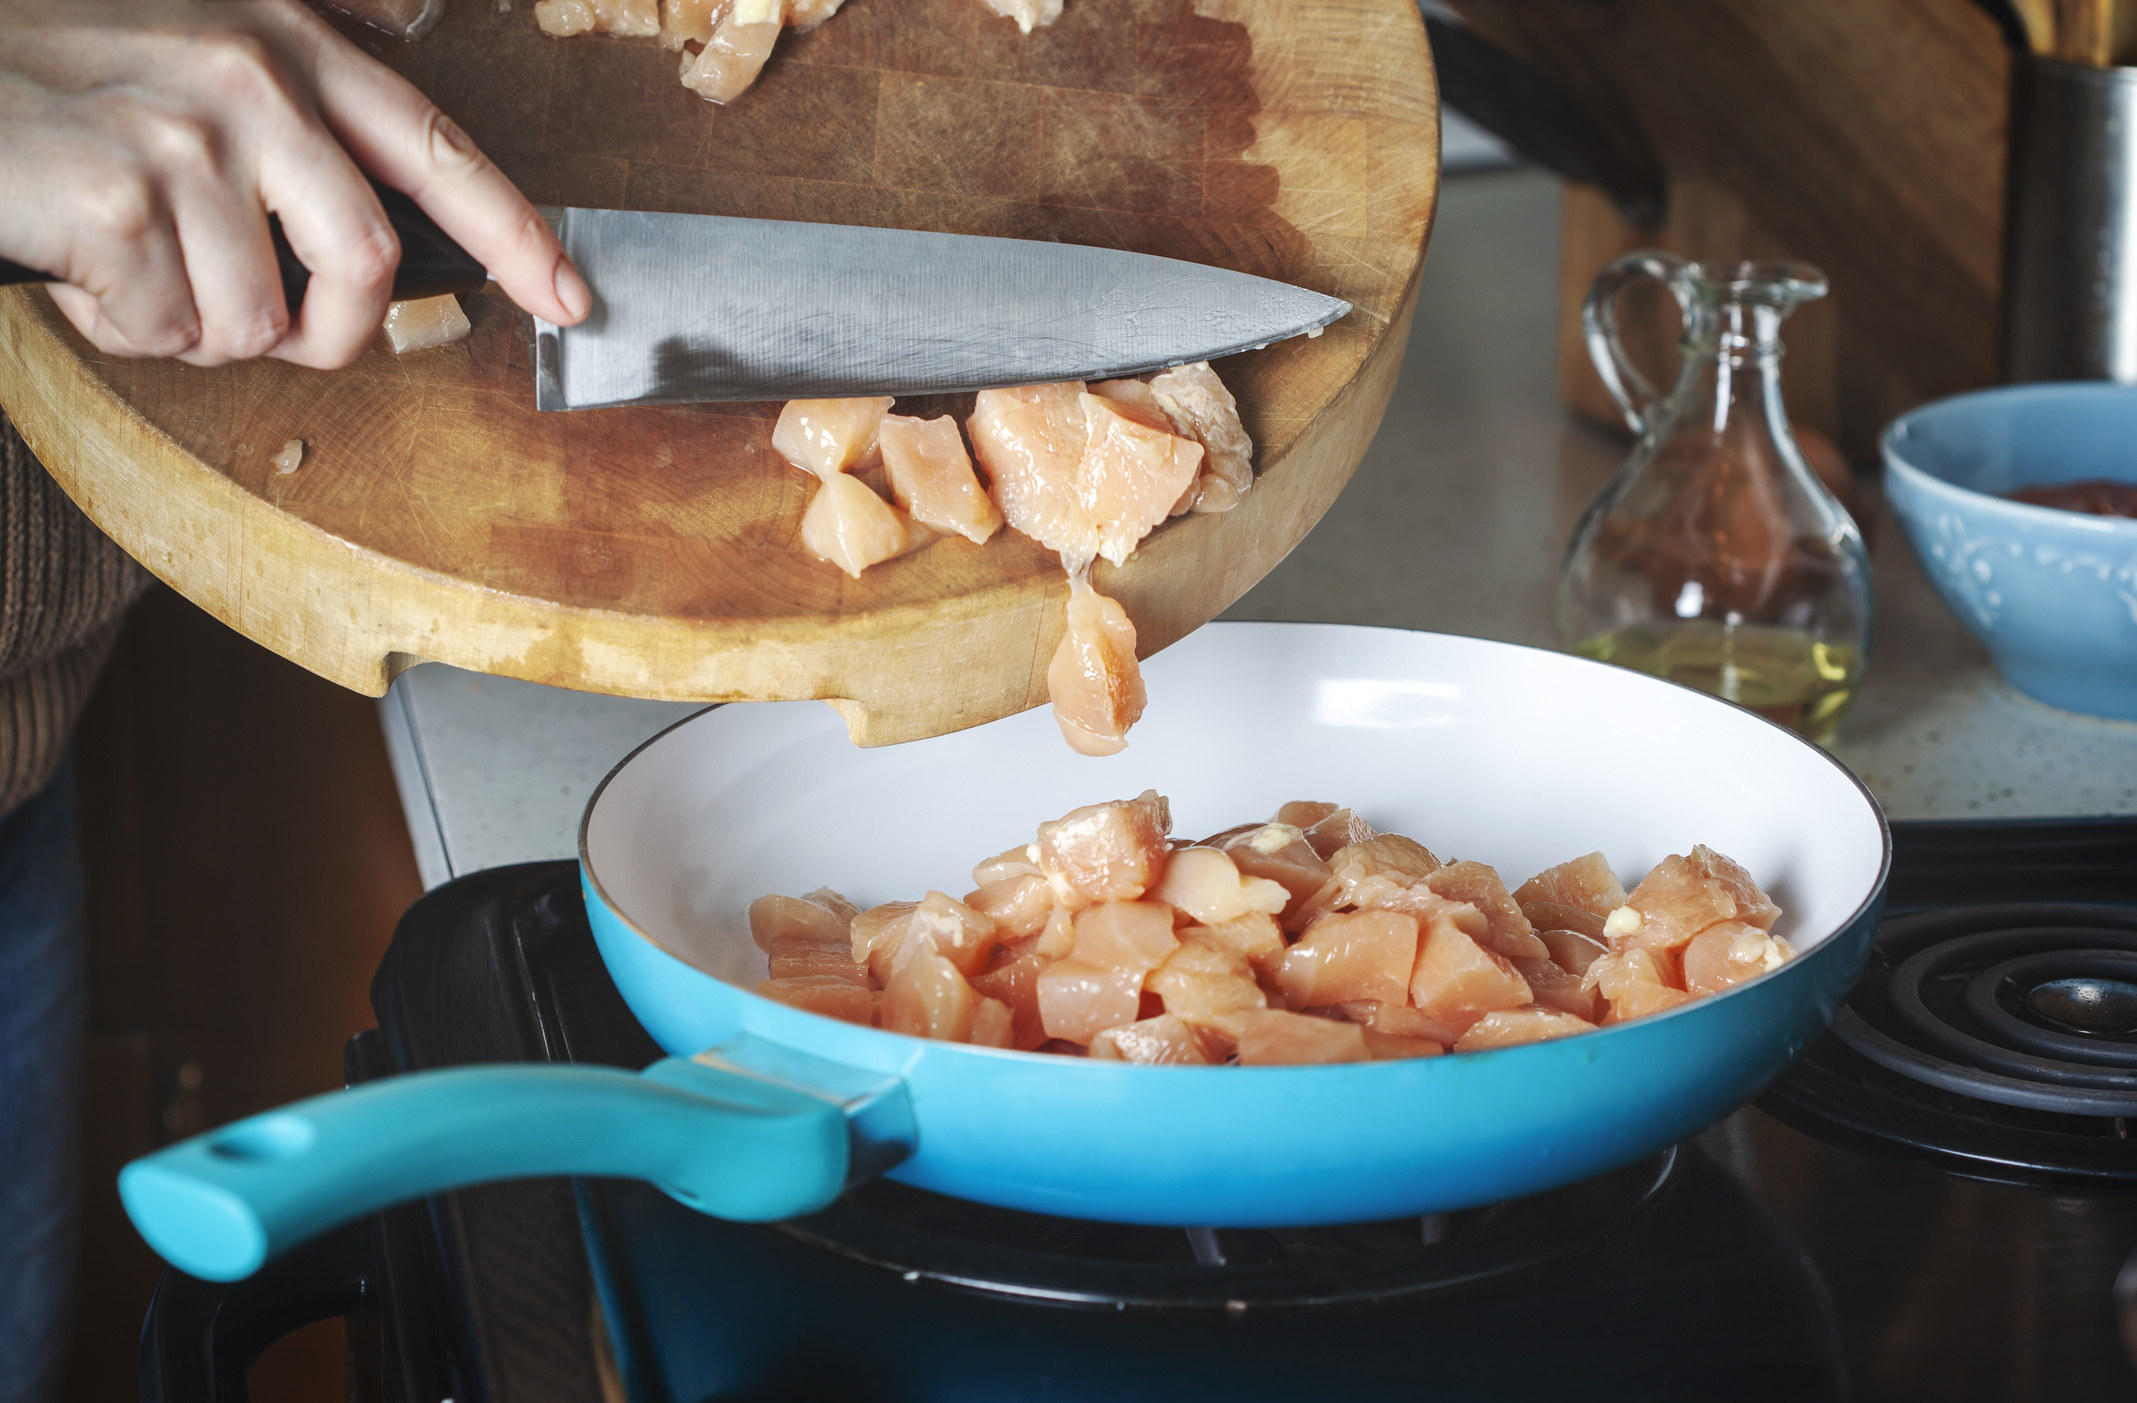 A woman putting diced chicken into a skillet.